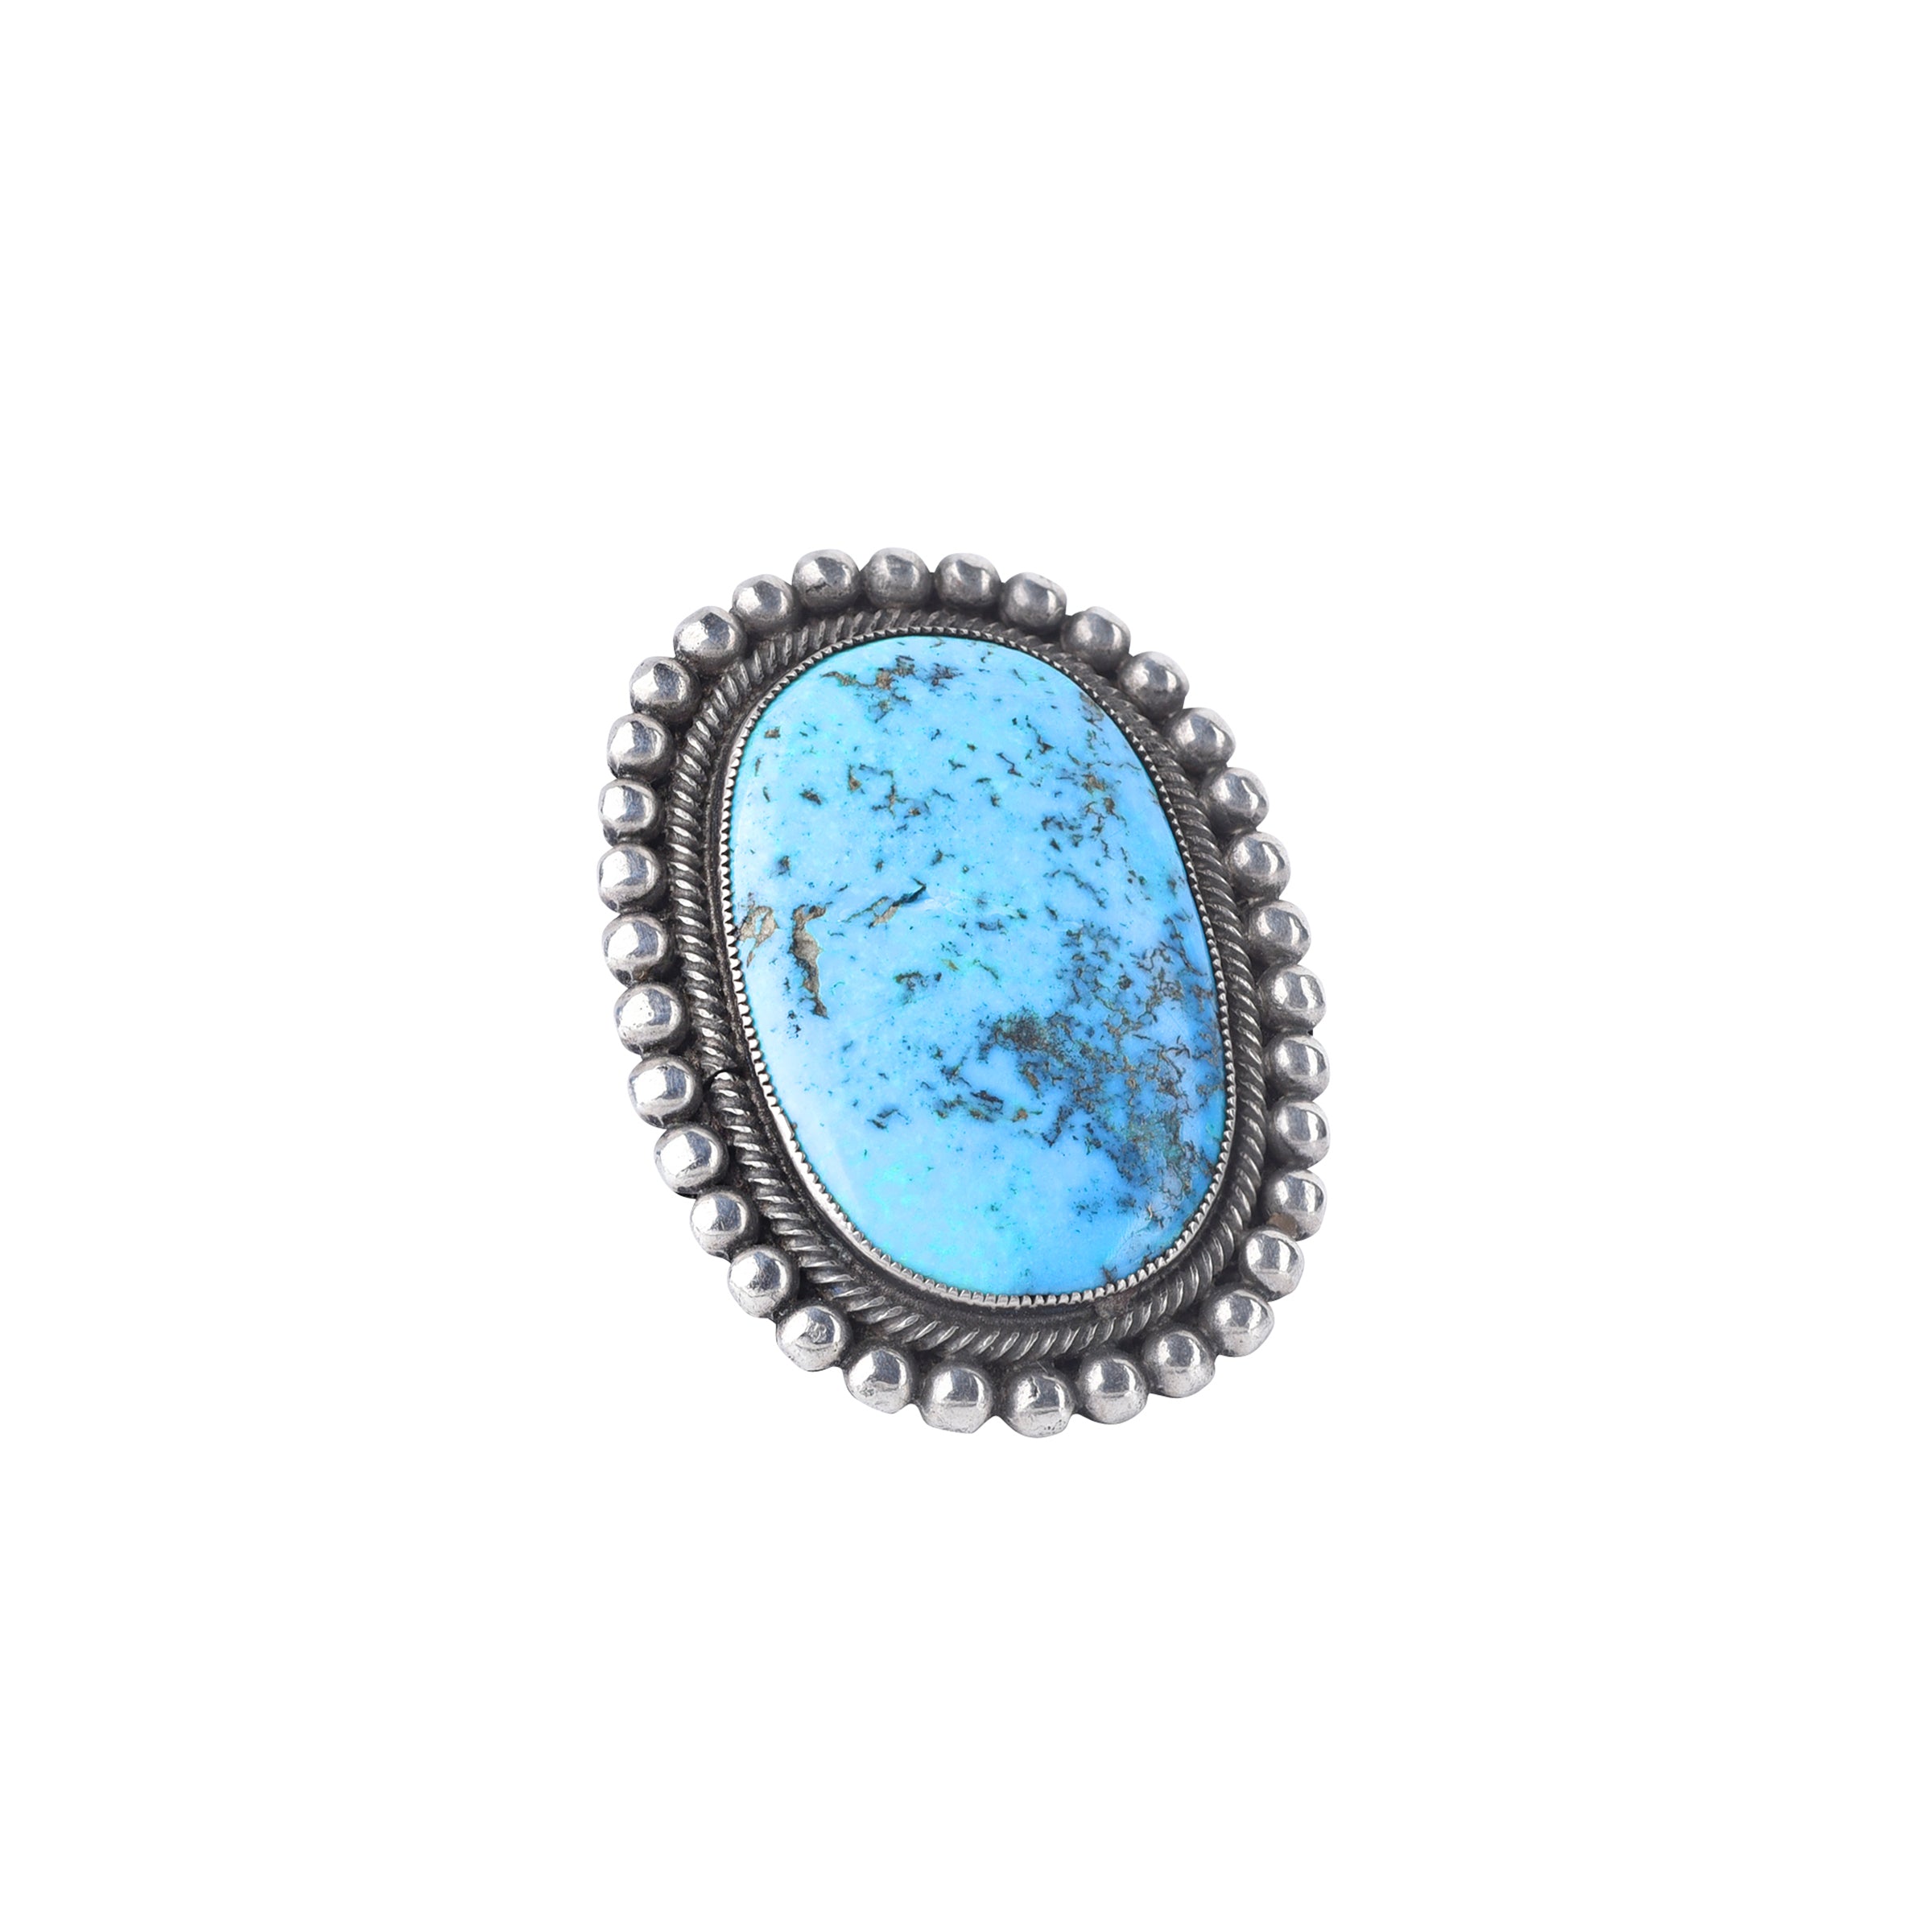 Vintage Turquoise Ring - Size 8